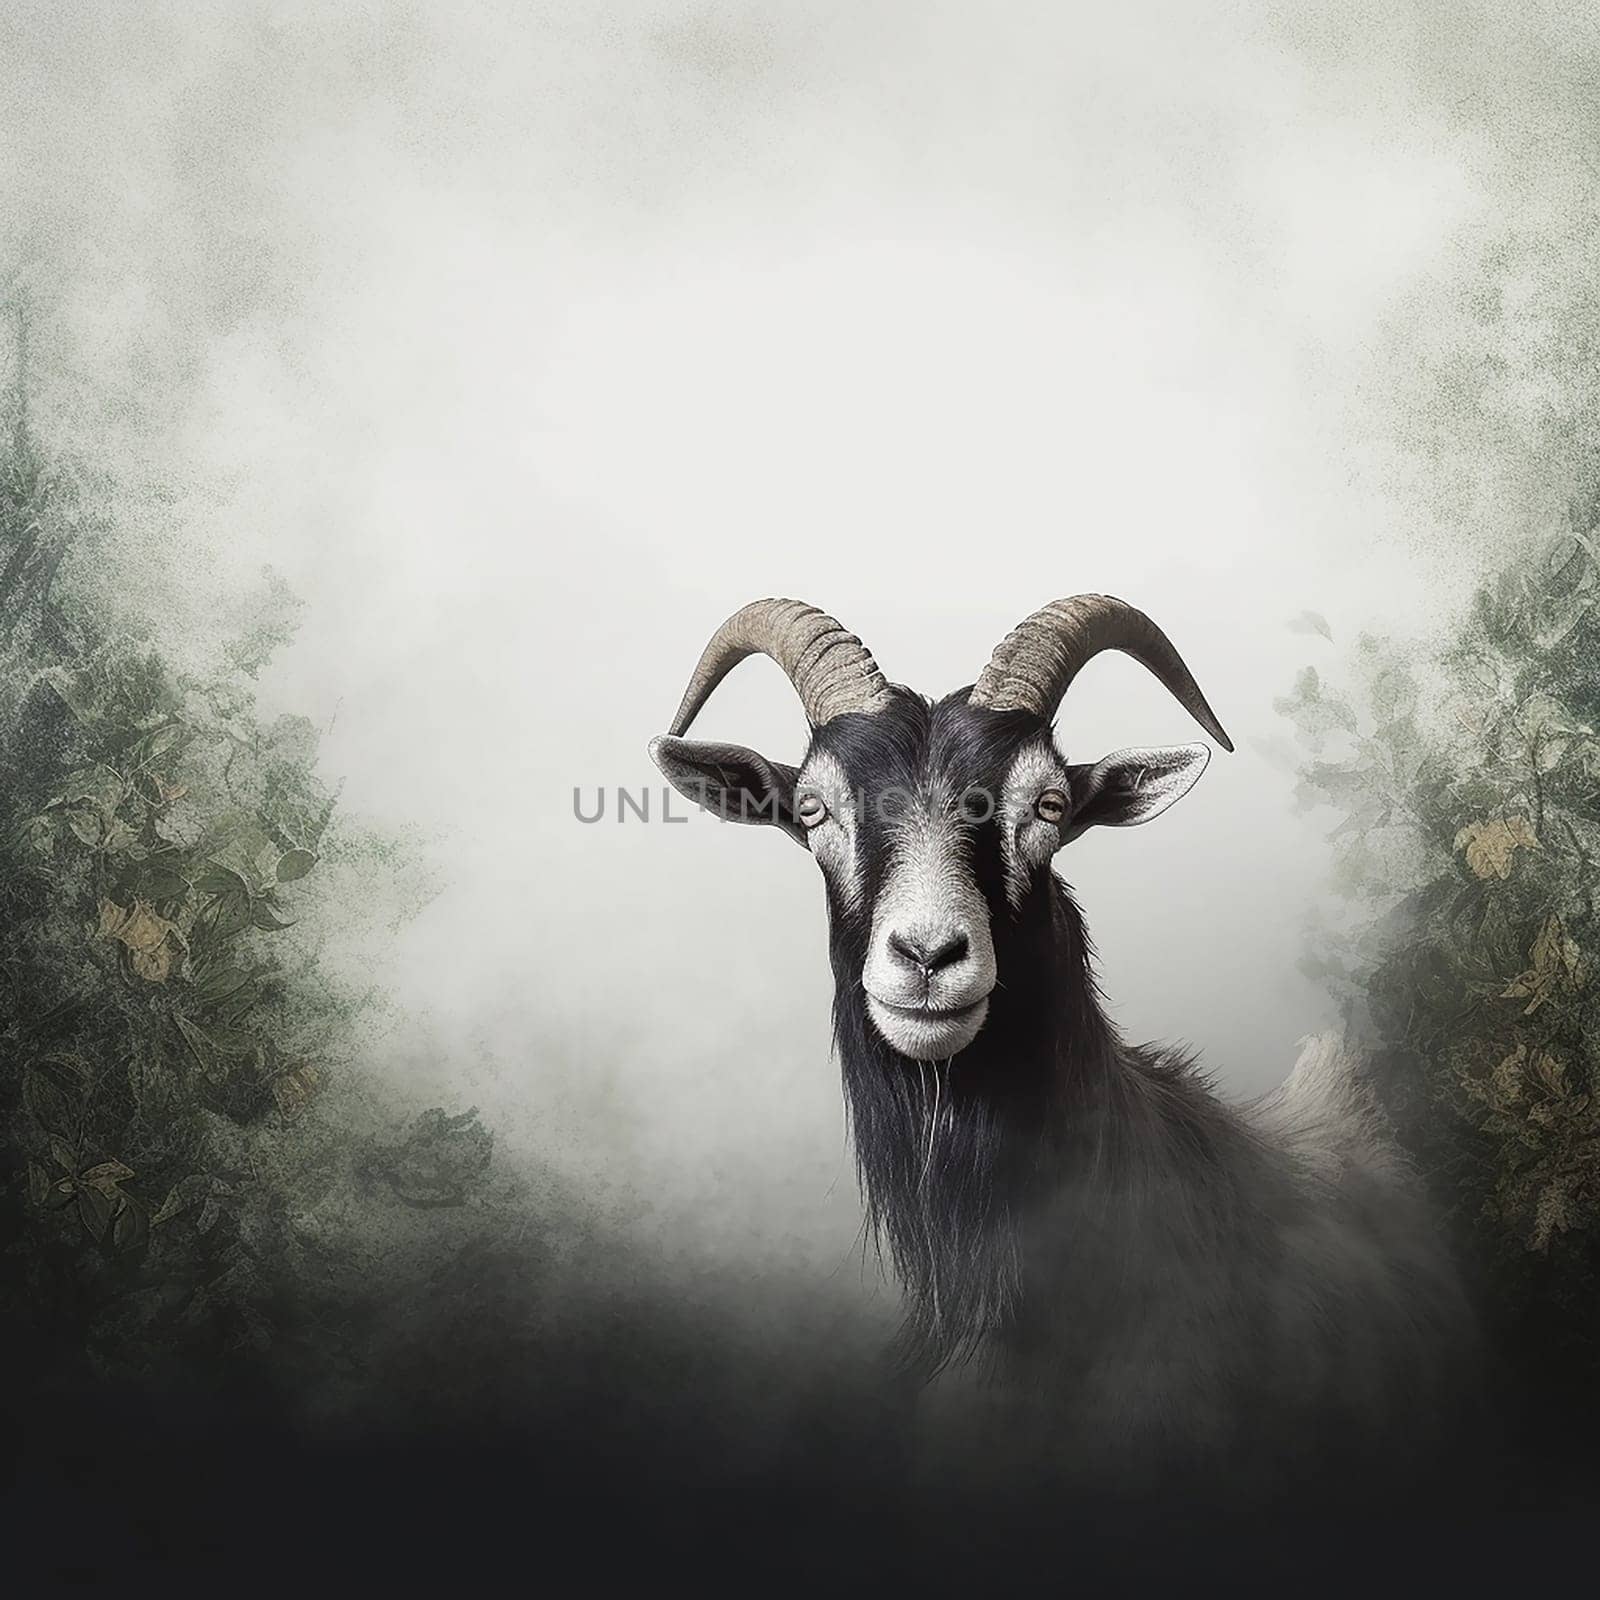 A photo of a farm animal goat, neutral background by Hype2art